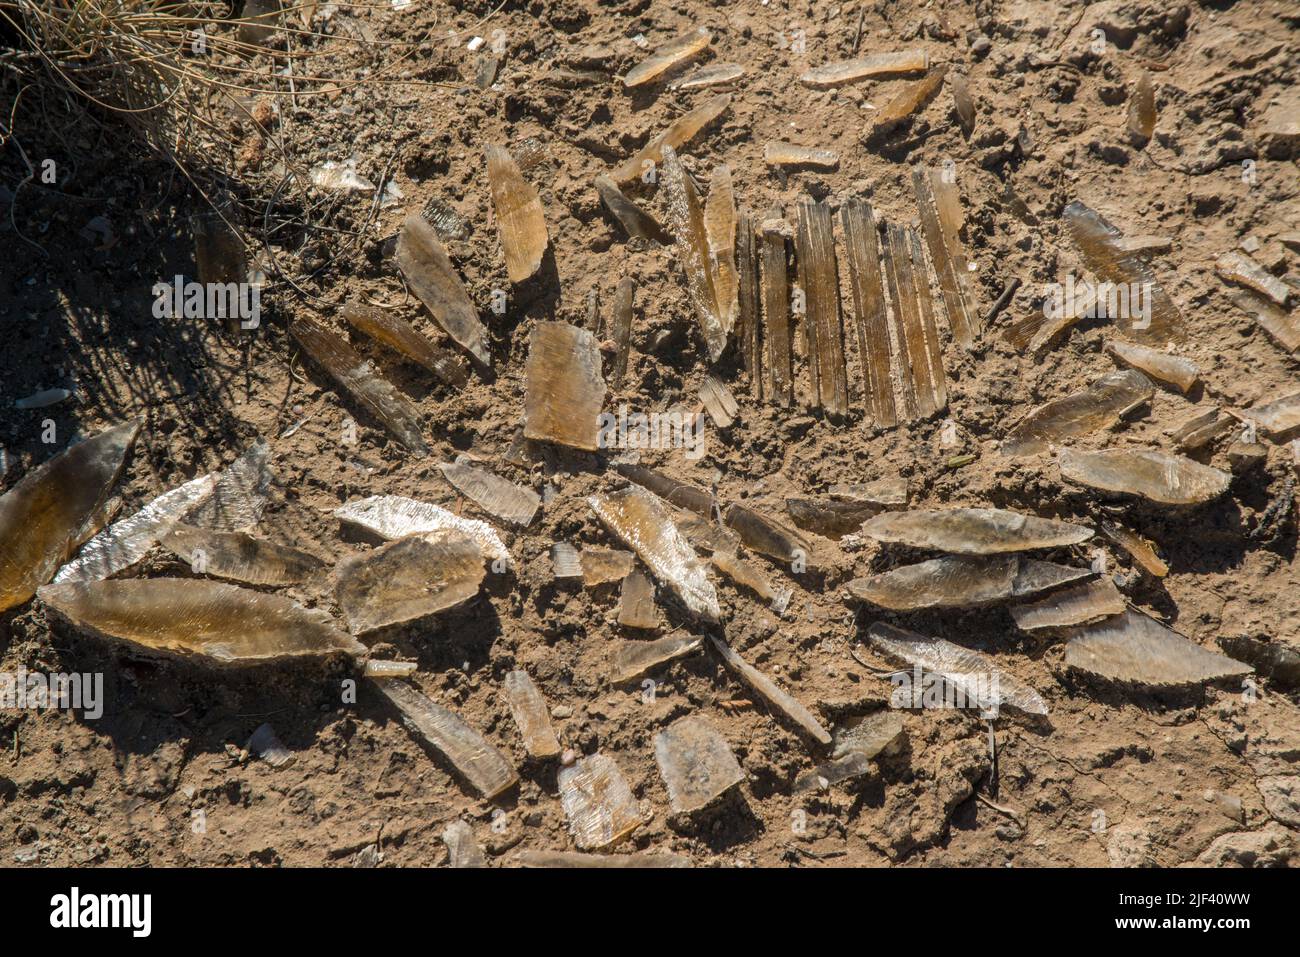 Desert landscape in New Mexico, gypsum crystals at the bottom of a dried lake, Lucero Lake Stock Photo